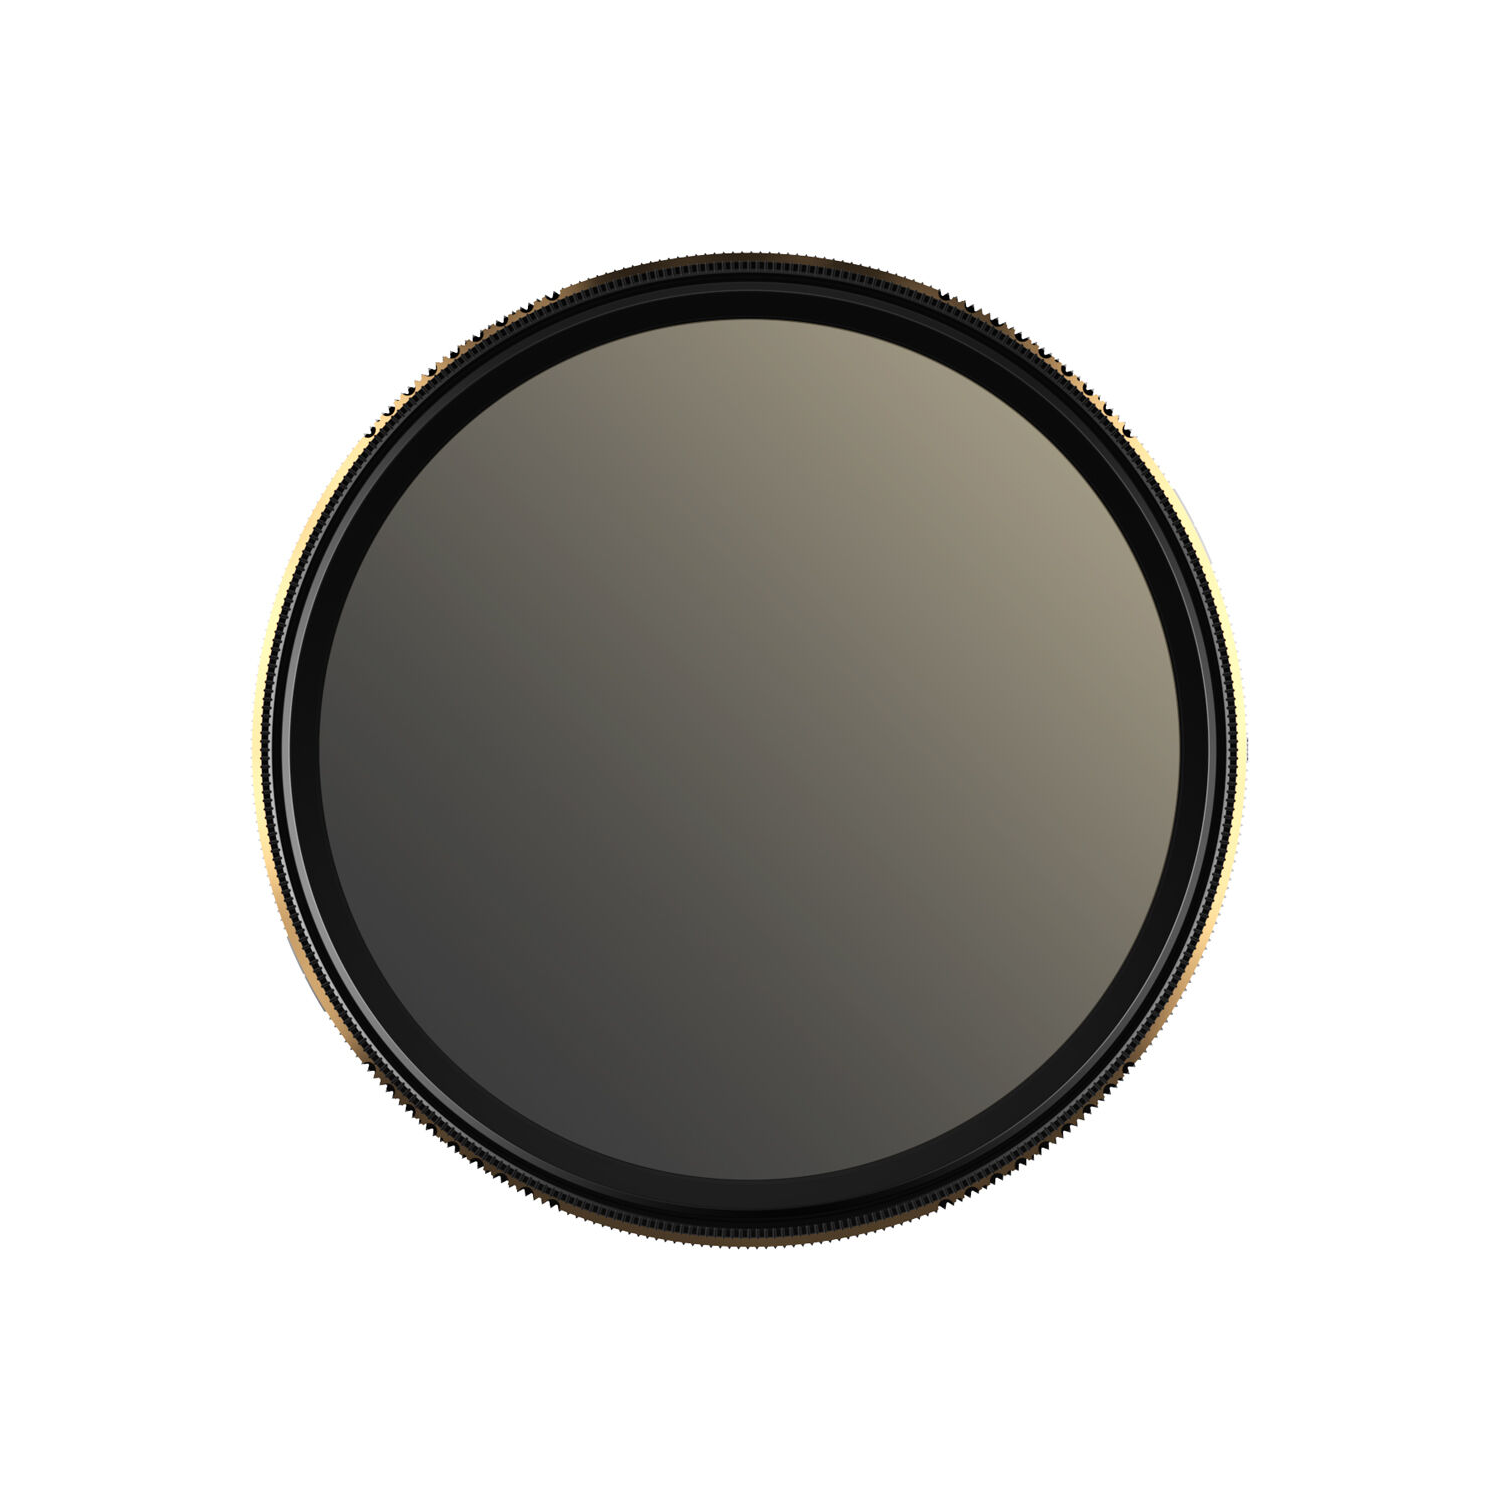 PolarPro Peter McKinnon Signature Edition II Variable ND 0.6 to 1.5 Filter - 2 to 5-Stop - 82mm